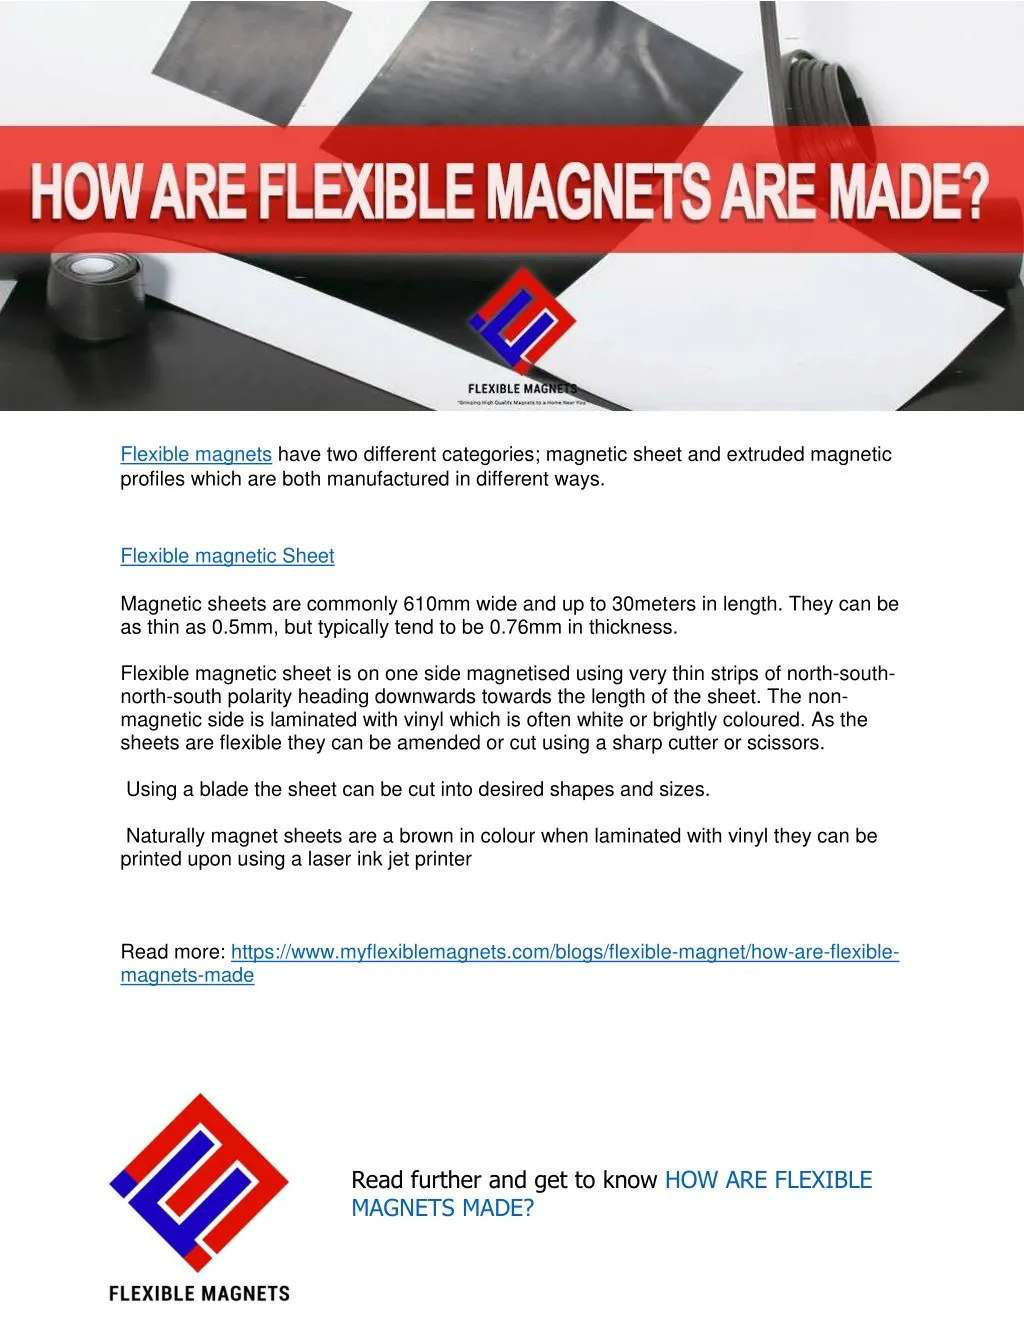 flexible magnets have two different categories